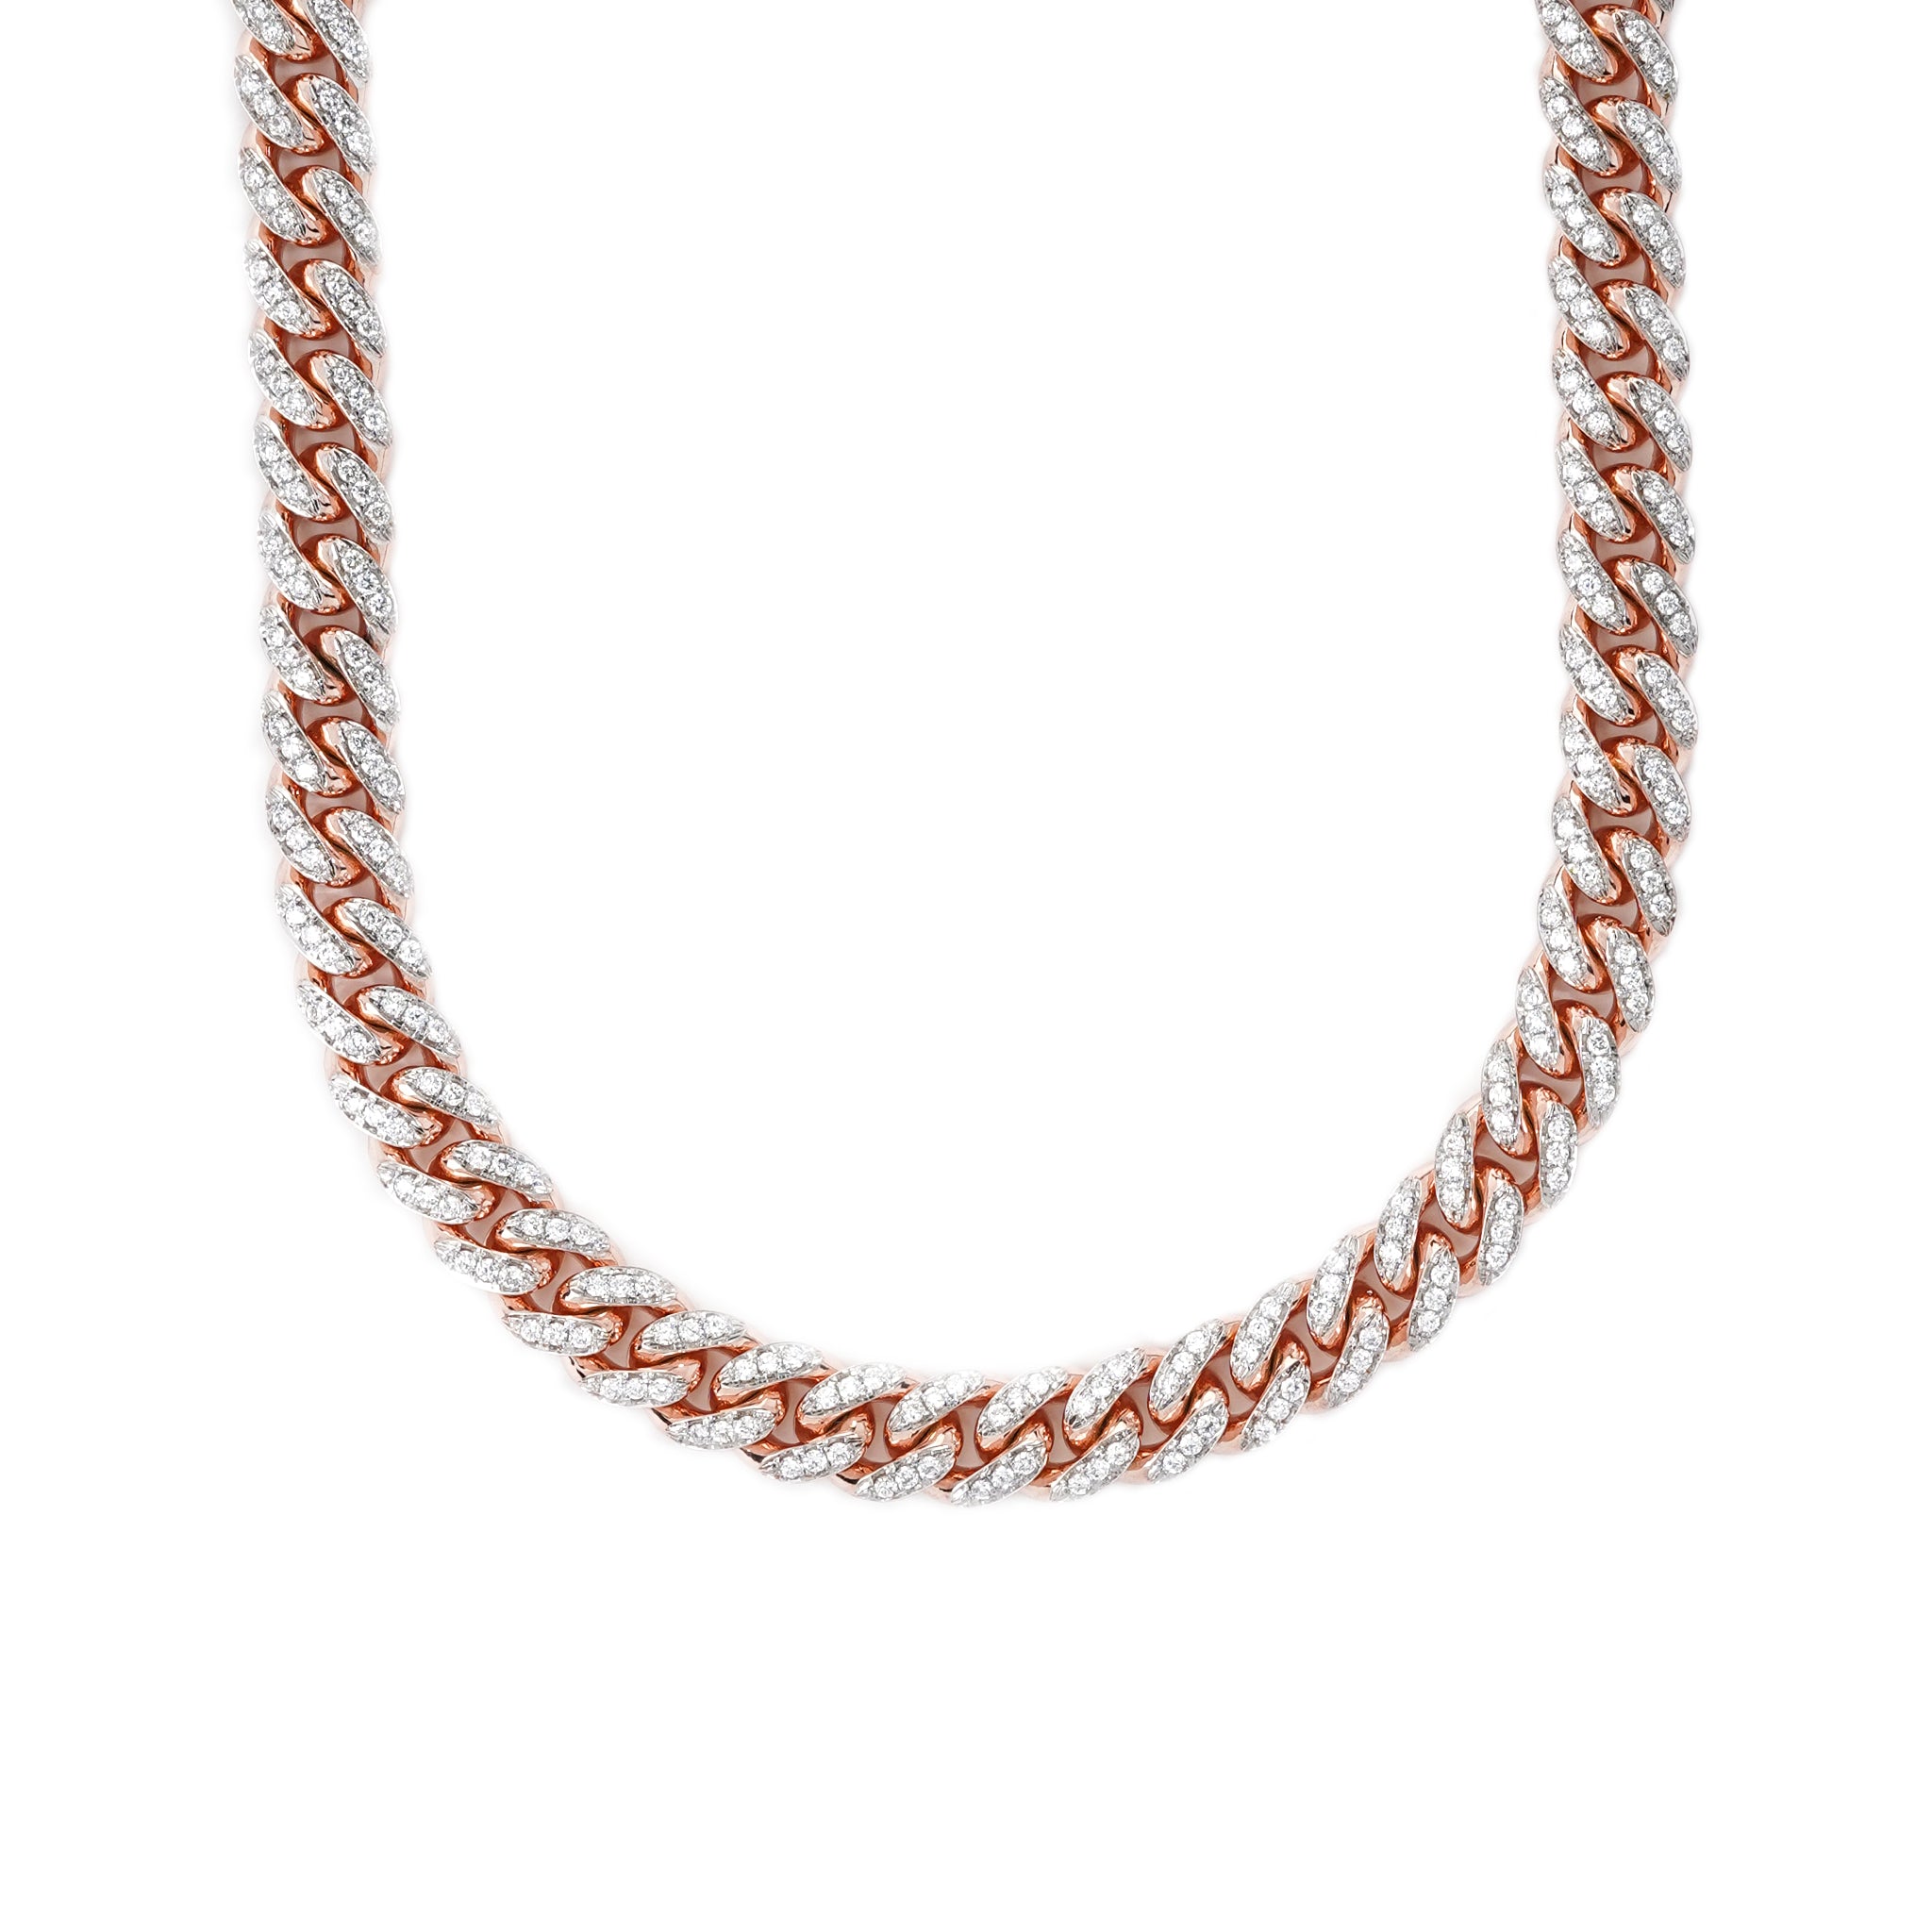 18K Rose Gold Diamond Cuban Links Chain (22inches)